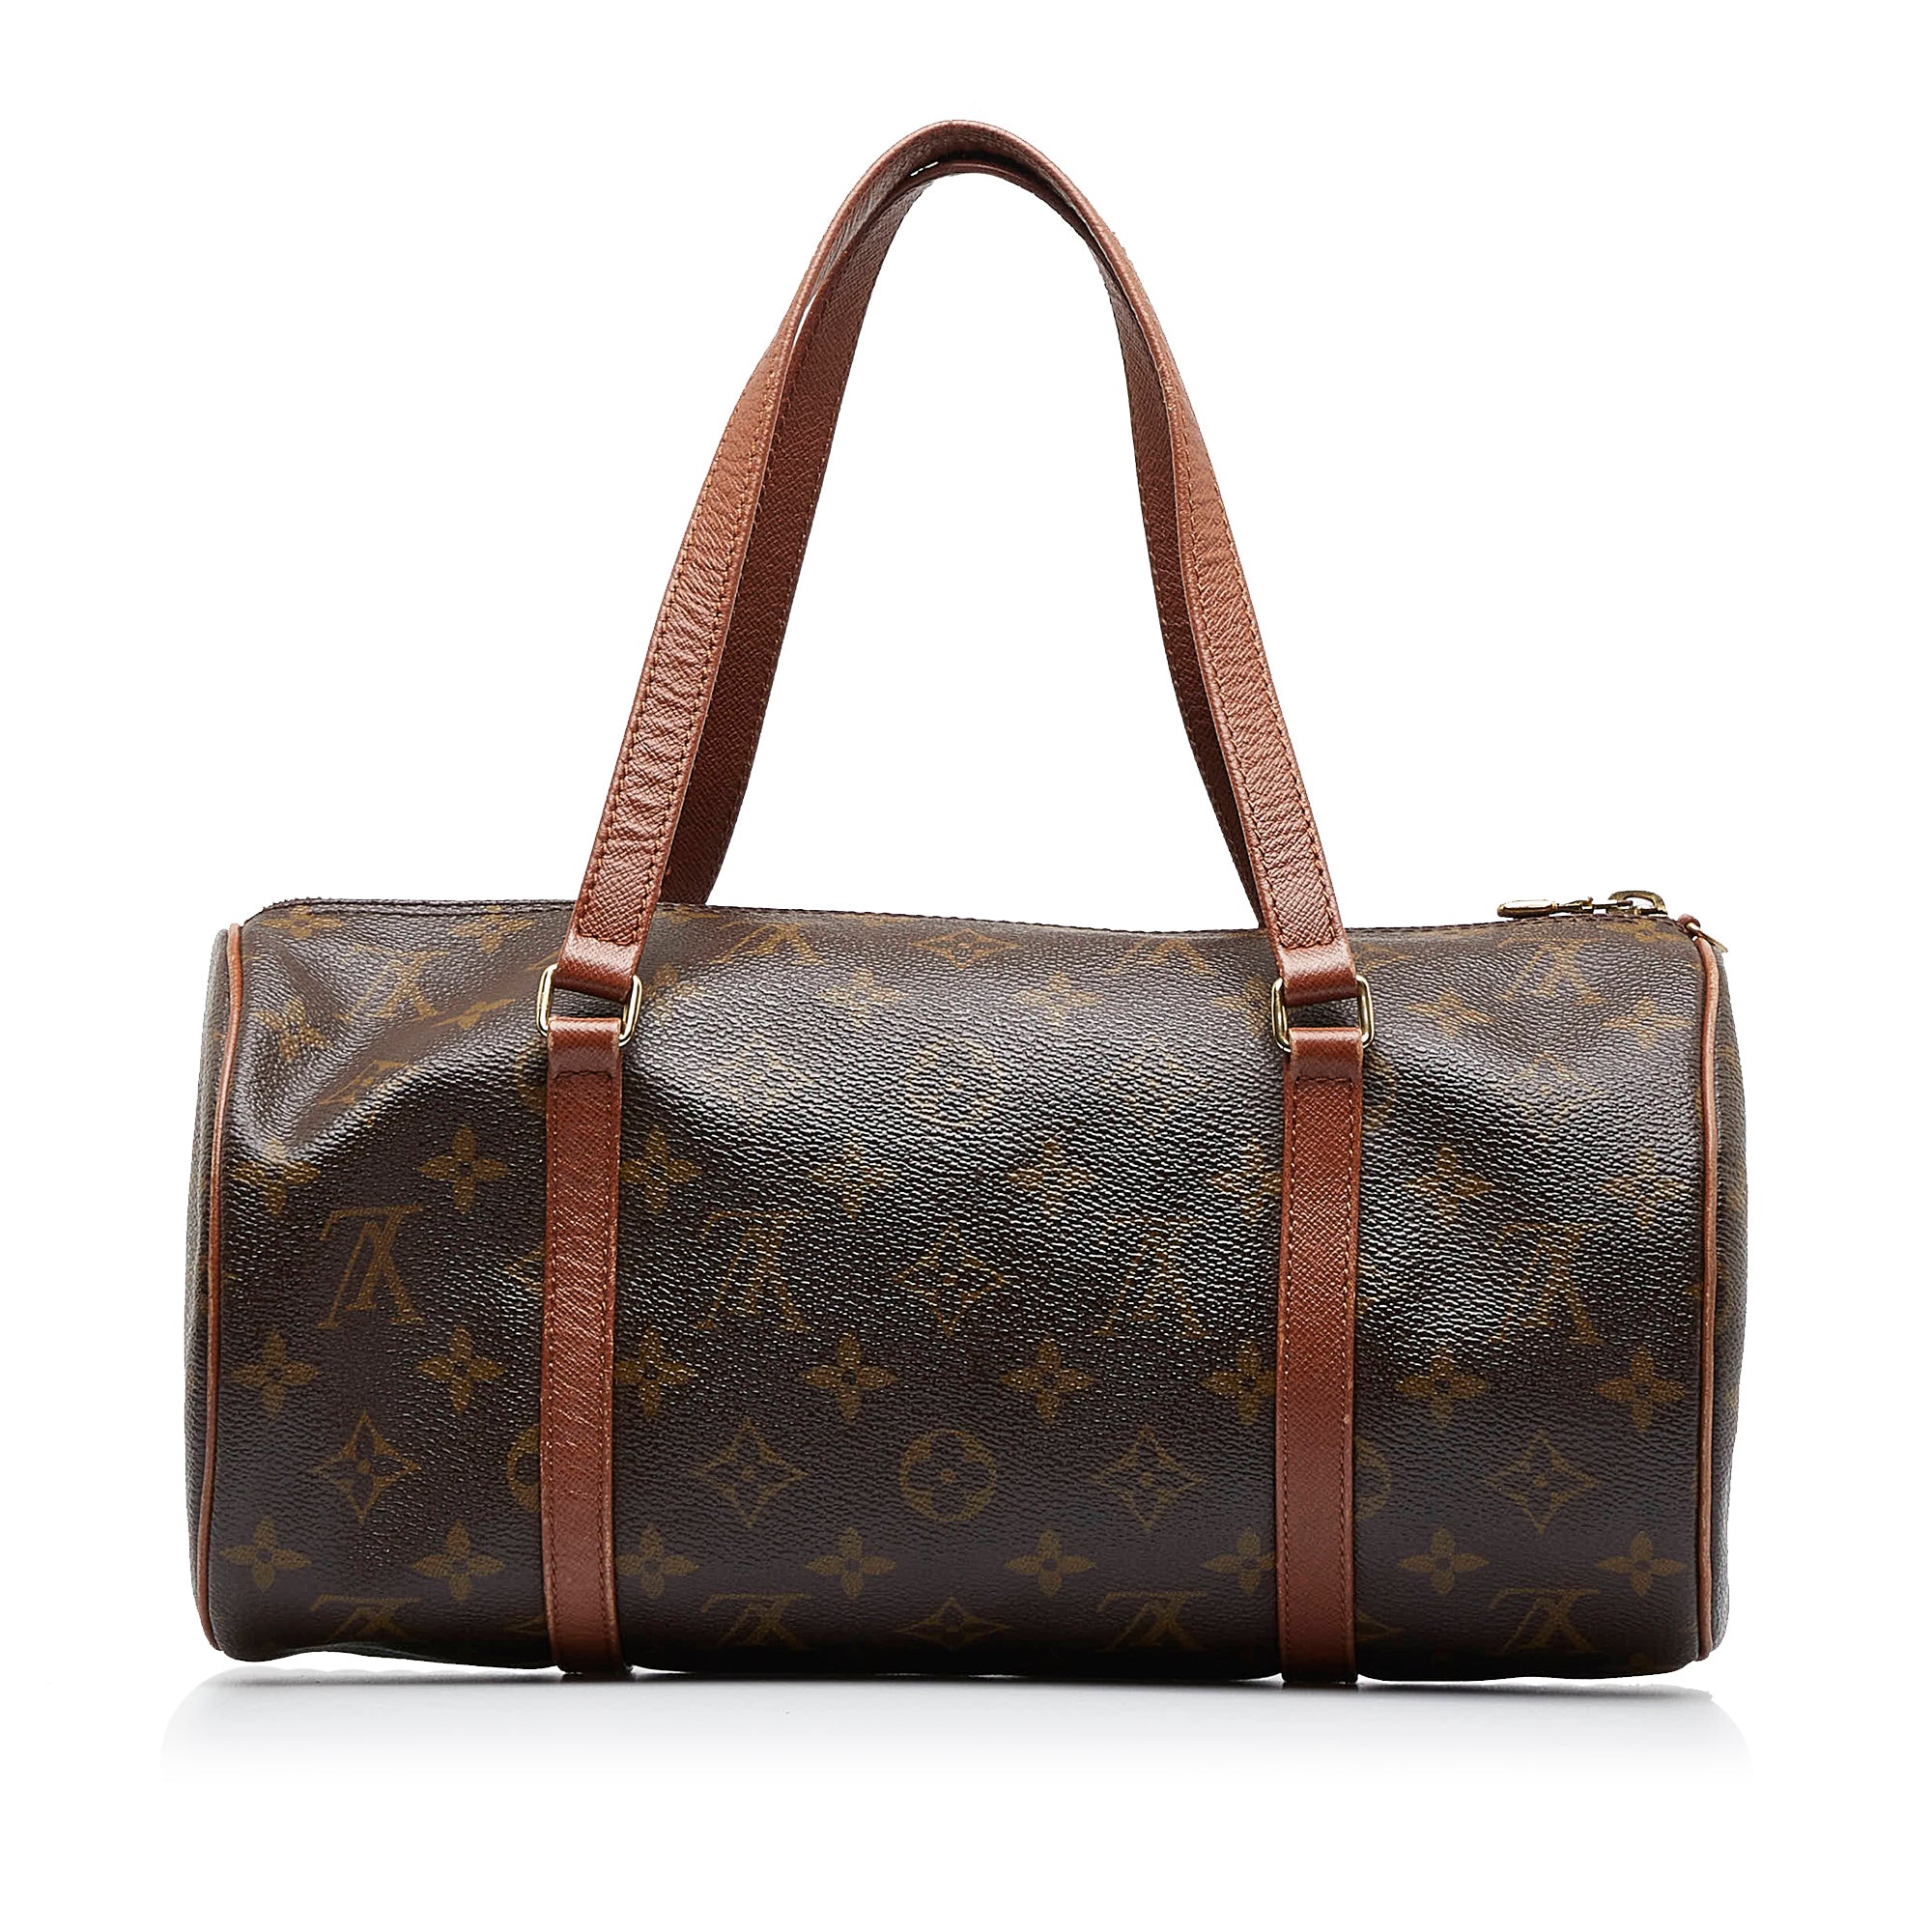 Trying to Authenticate Our Louis Vuitton Toiletry Pouch 26 Limited